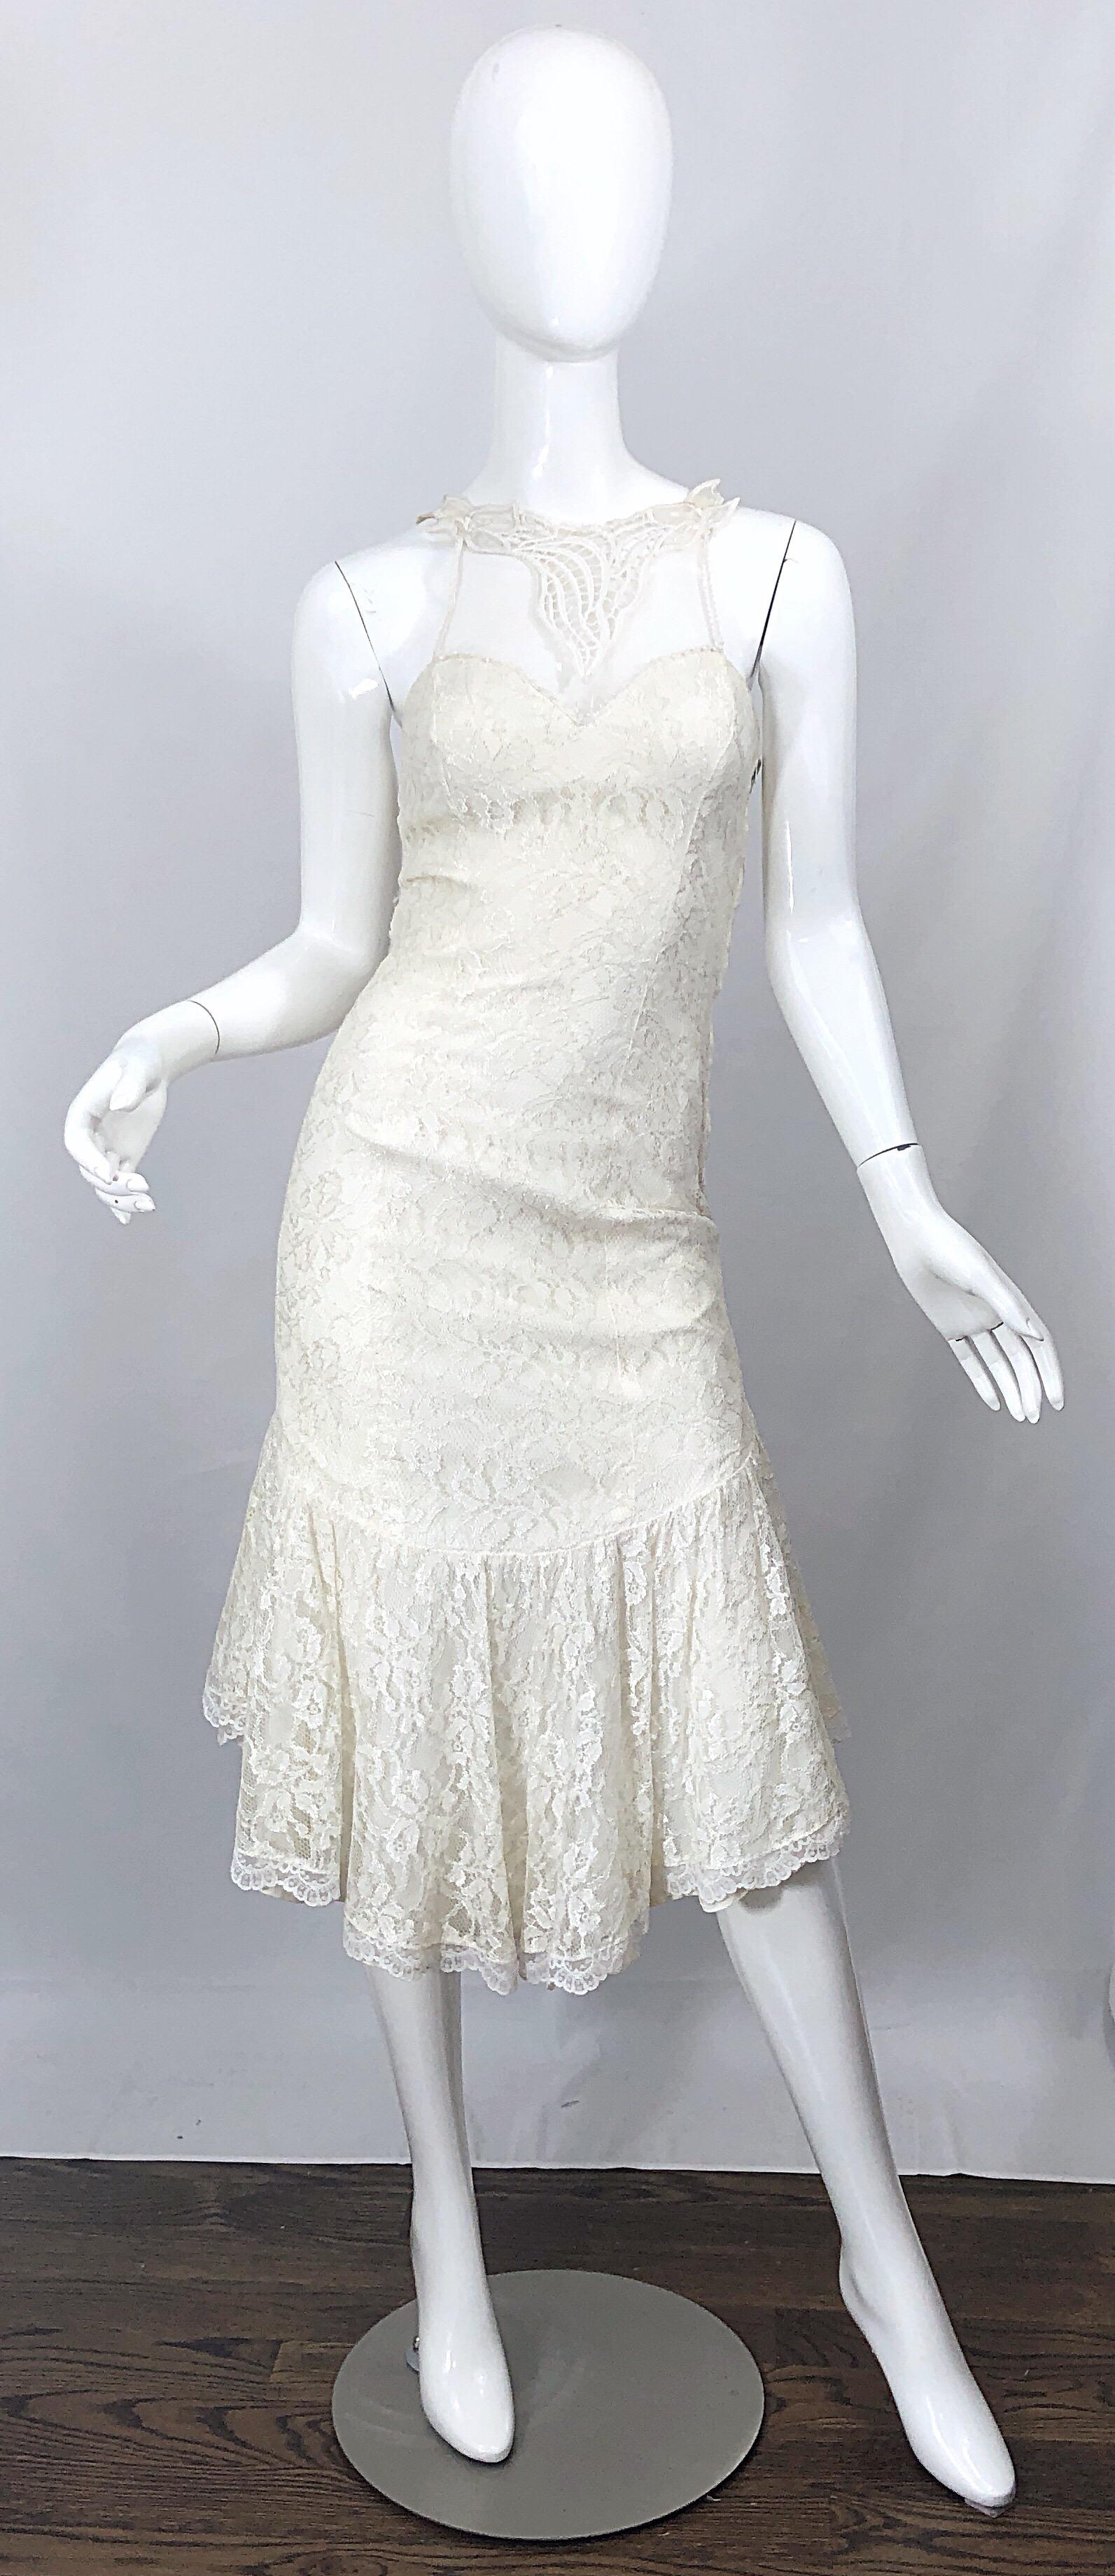 Fabulous 1980s SAMIR ivory / white lace embroidered handkerchief hem cocktail dress! Features a sweetheart neckline with a mesh embroidered overlay above the bust. Satin bow at center back, just above the rear. Hidden zipper up the back with